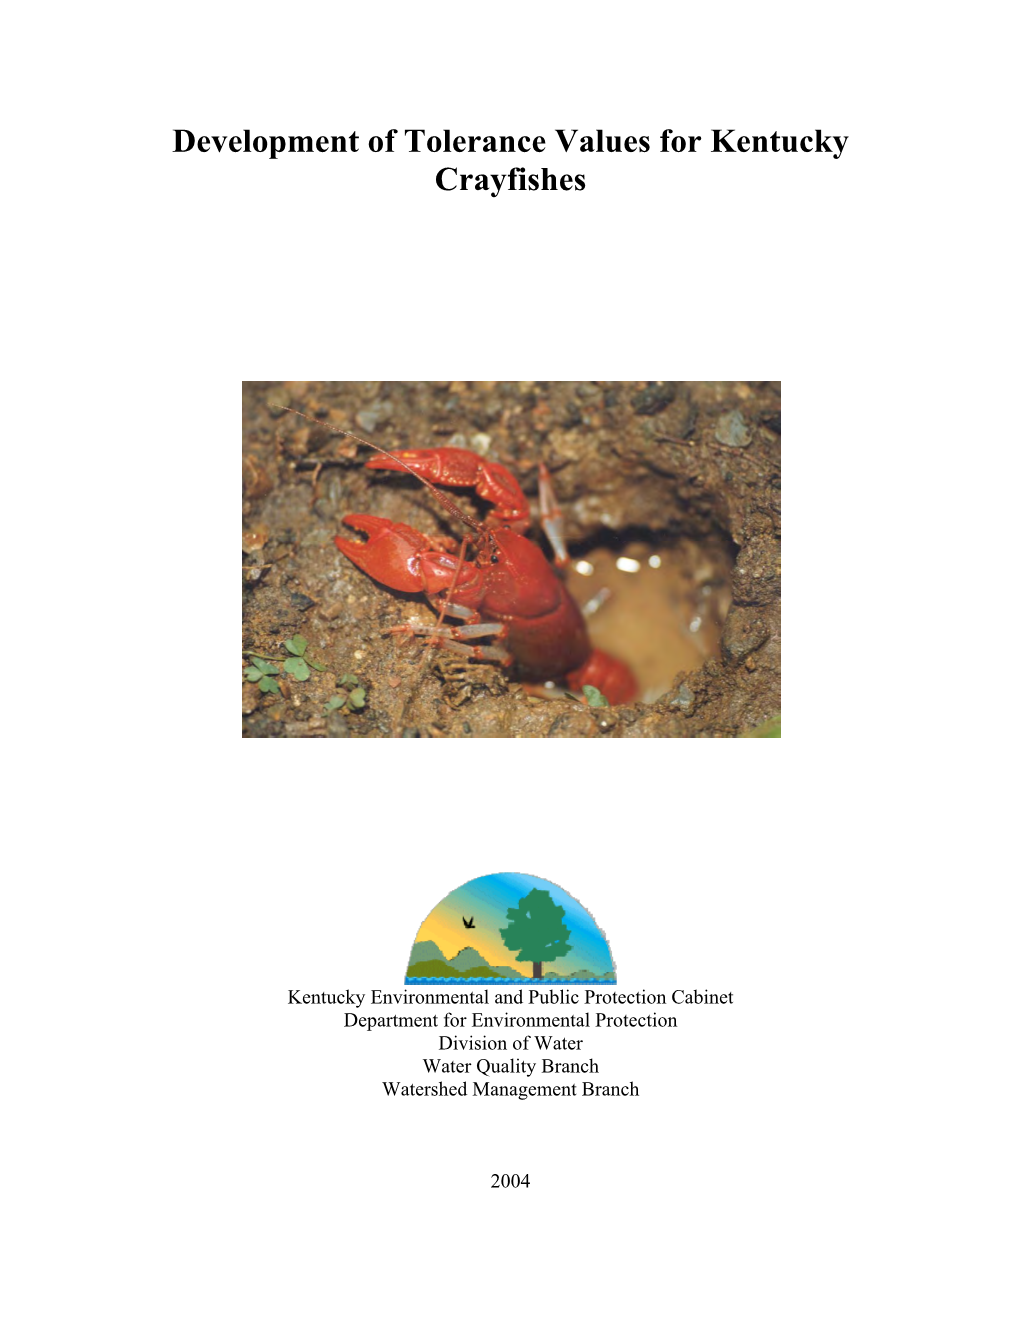 Development of Tolerance Values for Kentucky Crayfishes